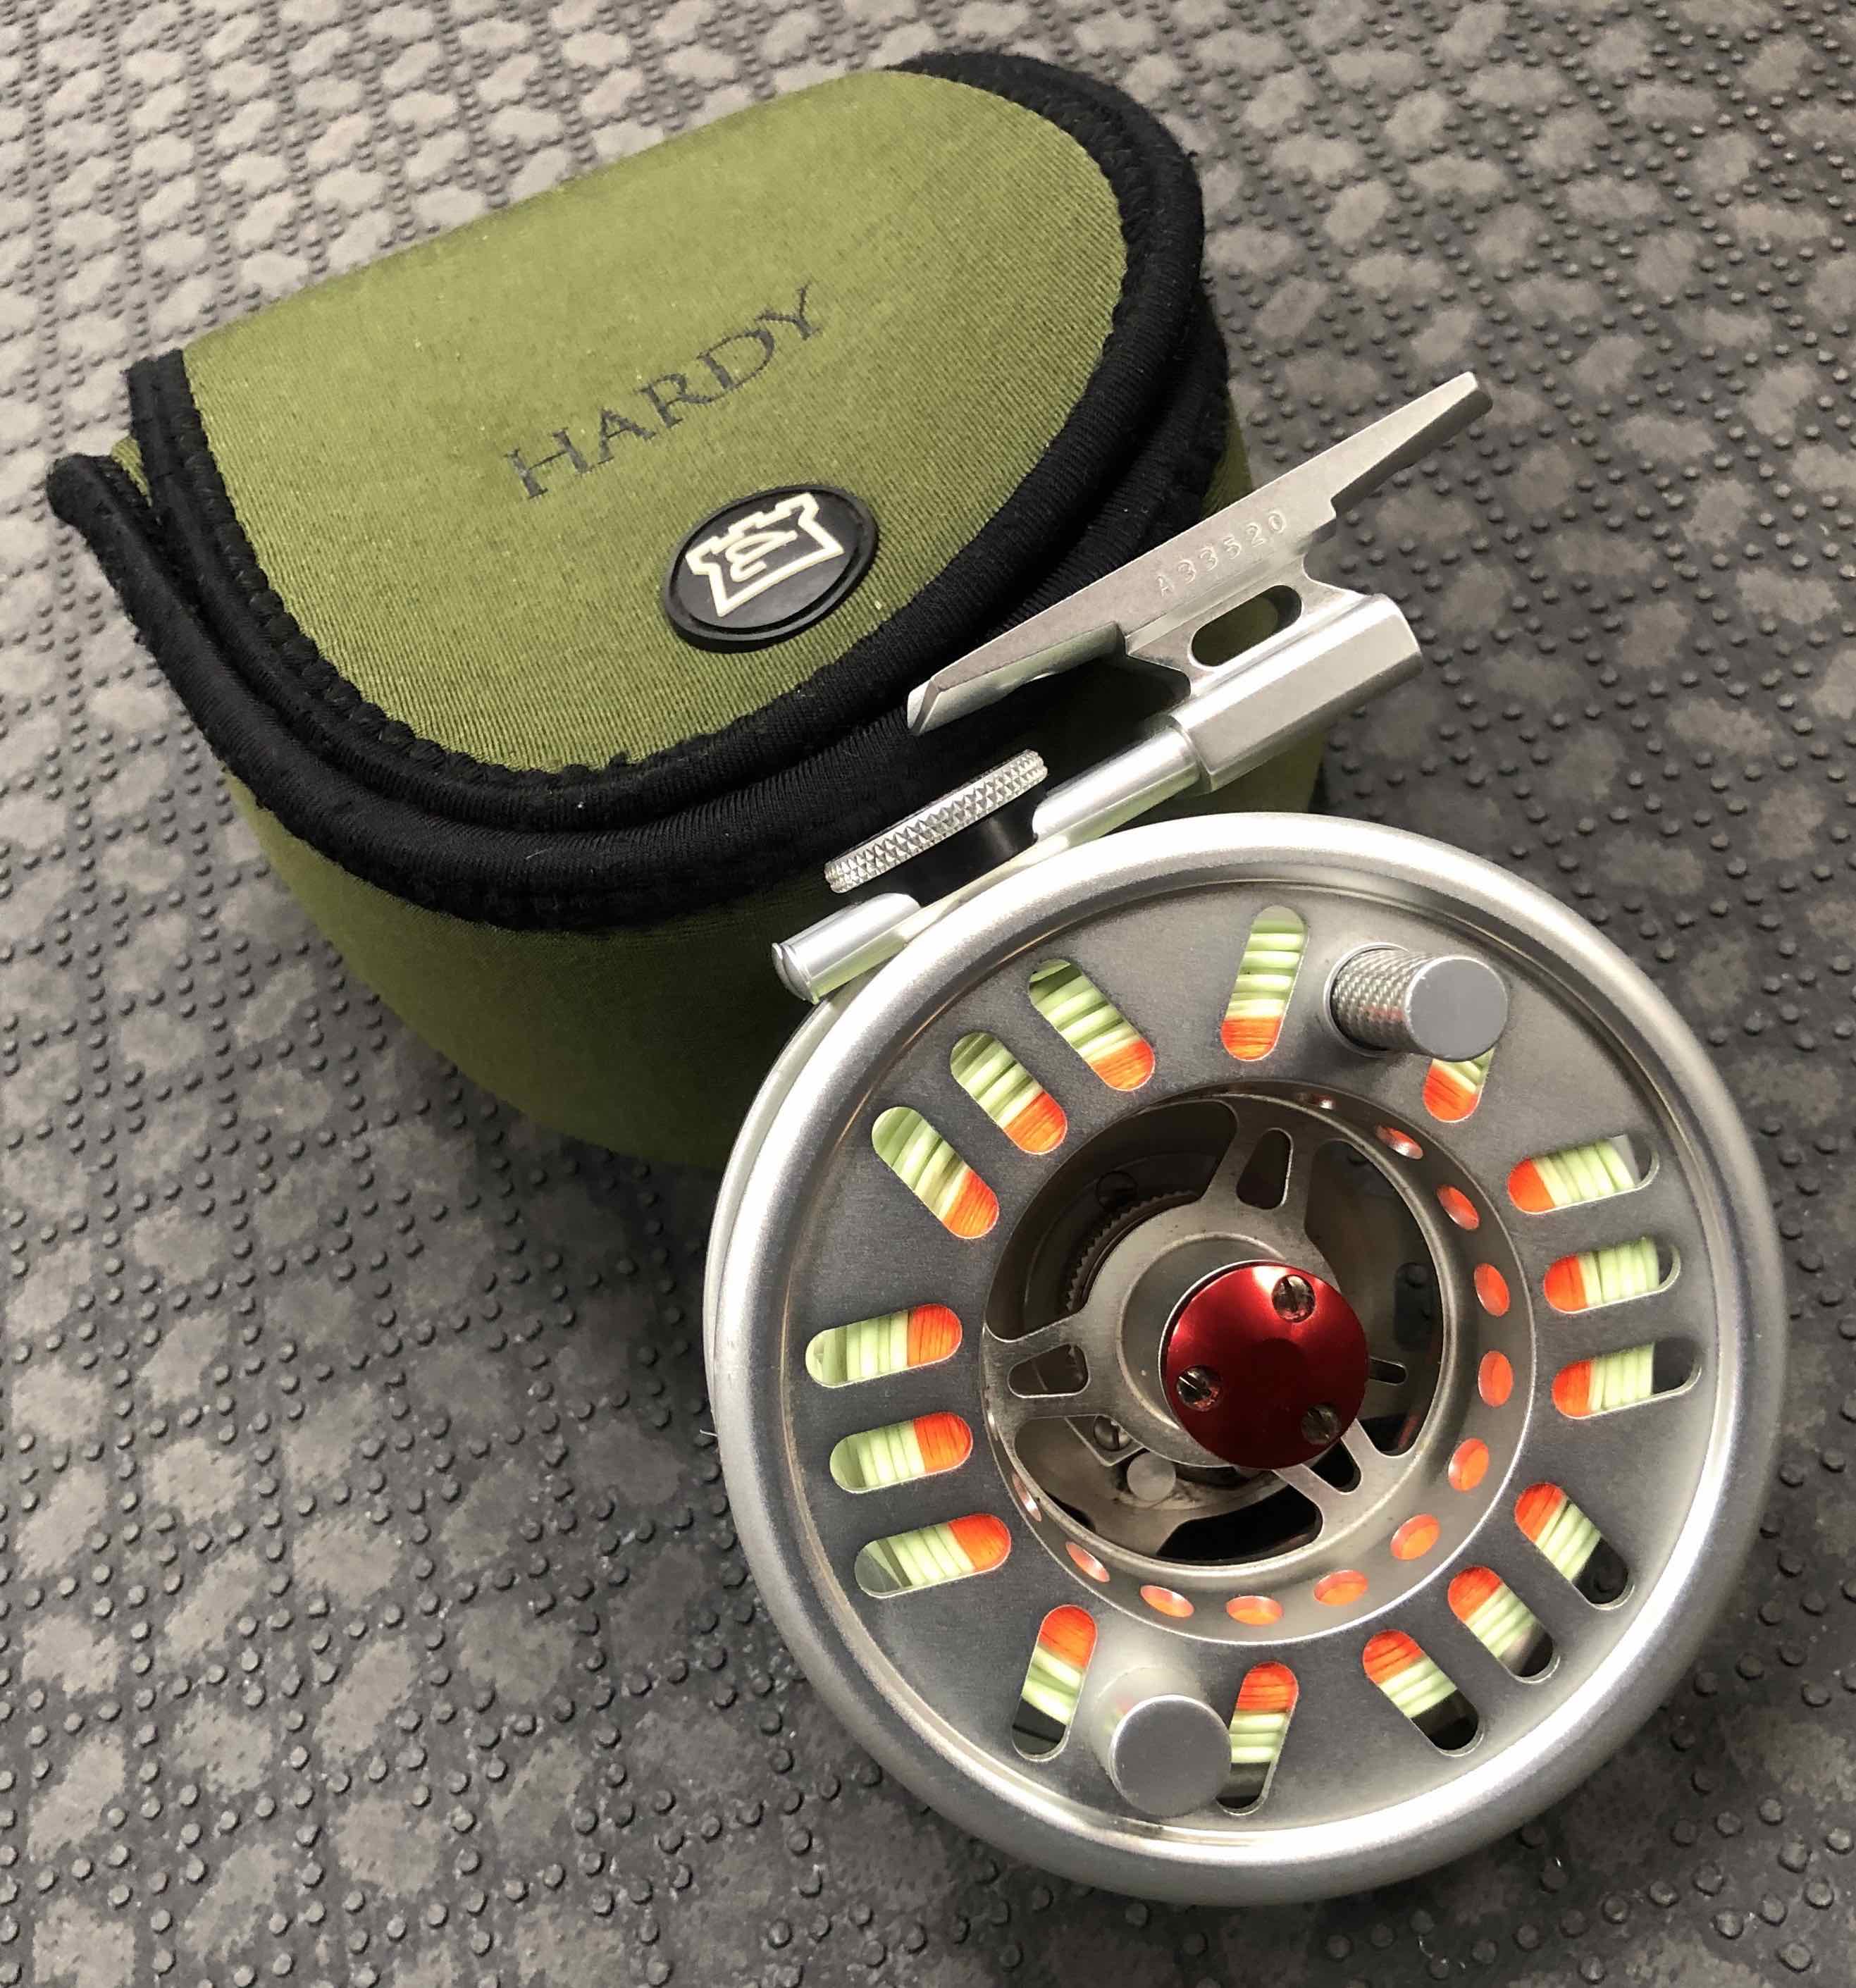 NEW PRICE - Hardy Limited Edition 975 SE - Swift Fly Reel - c/w WF8 Fly Line - GREAT SHAPE! - WAS $300 - NOW $250